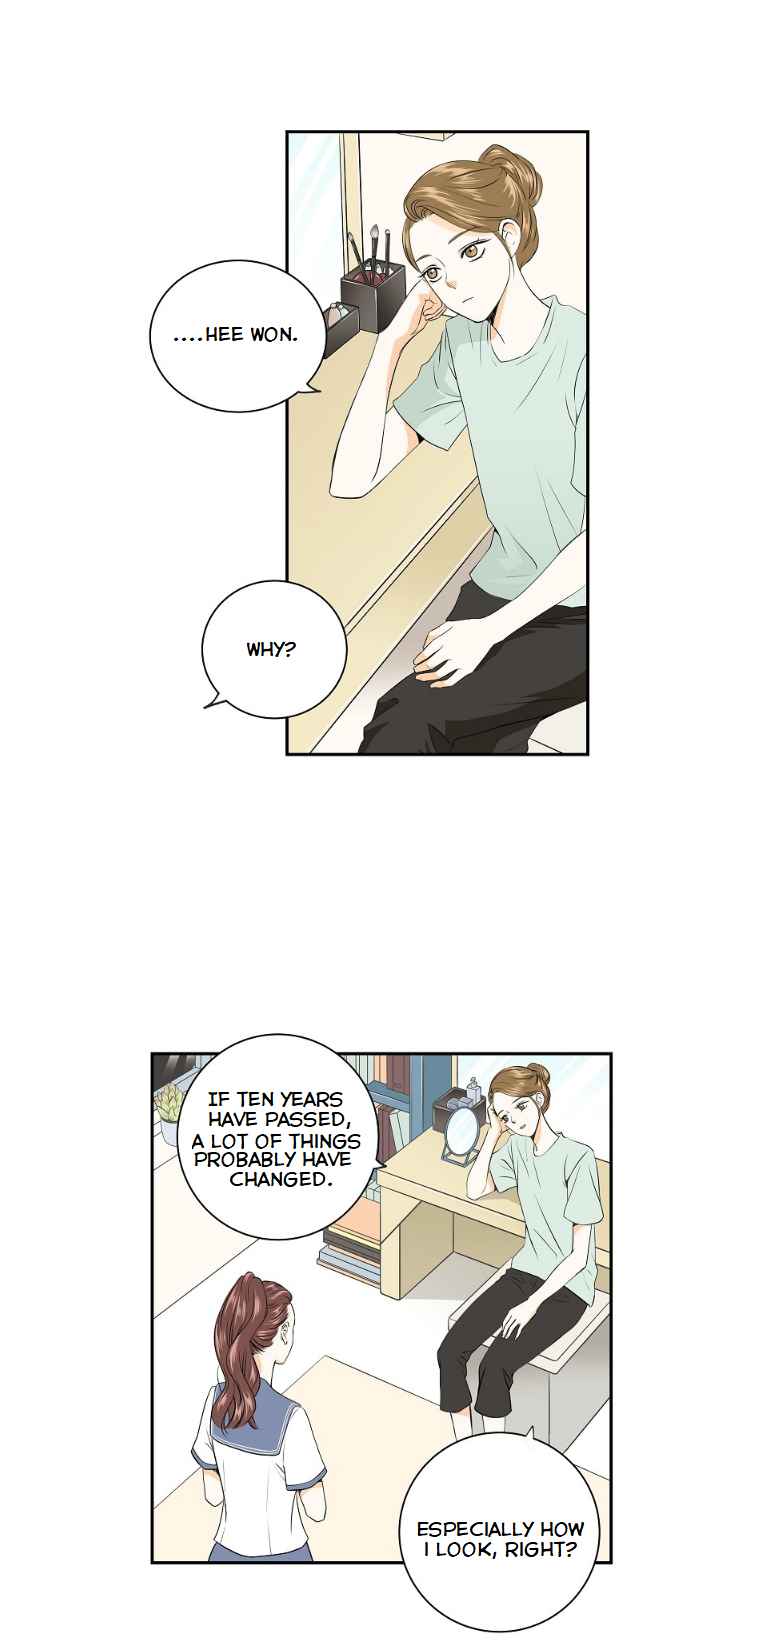 It Is My First Love Vol. 1 Ch. 3